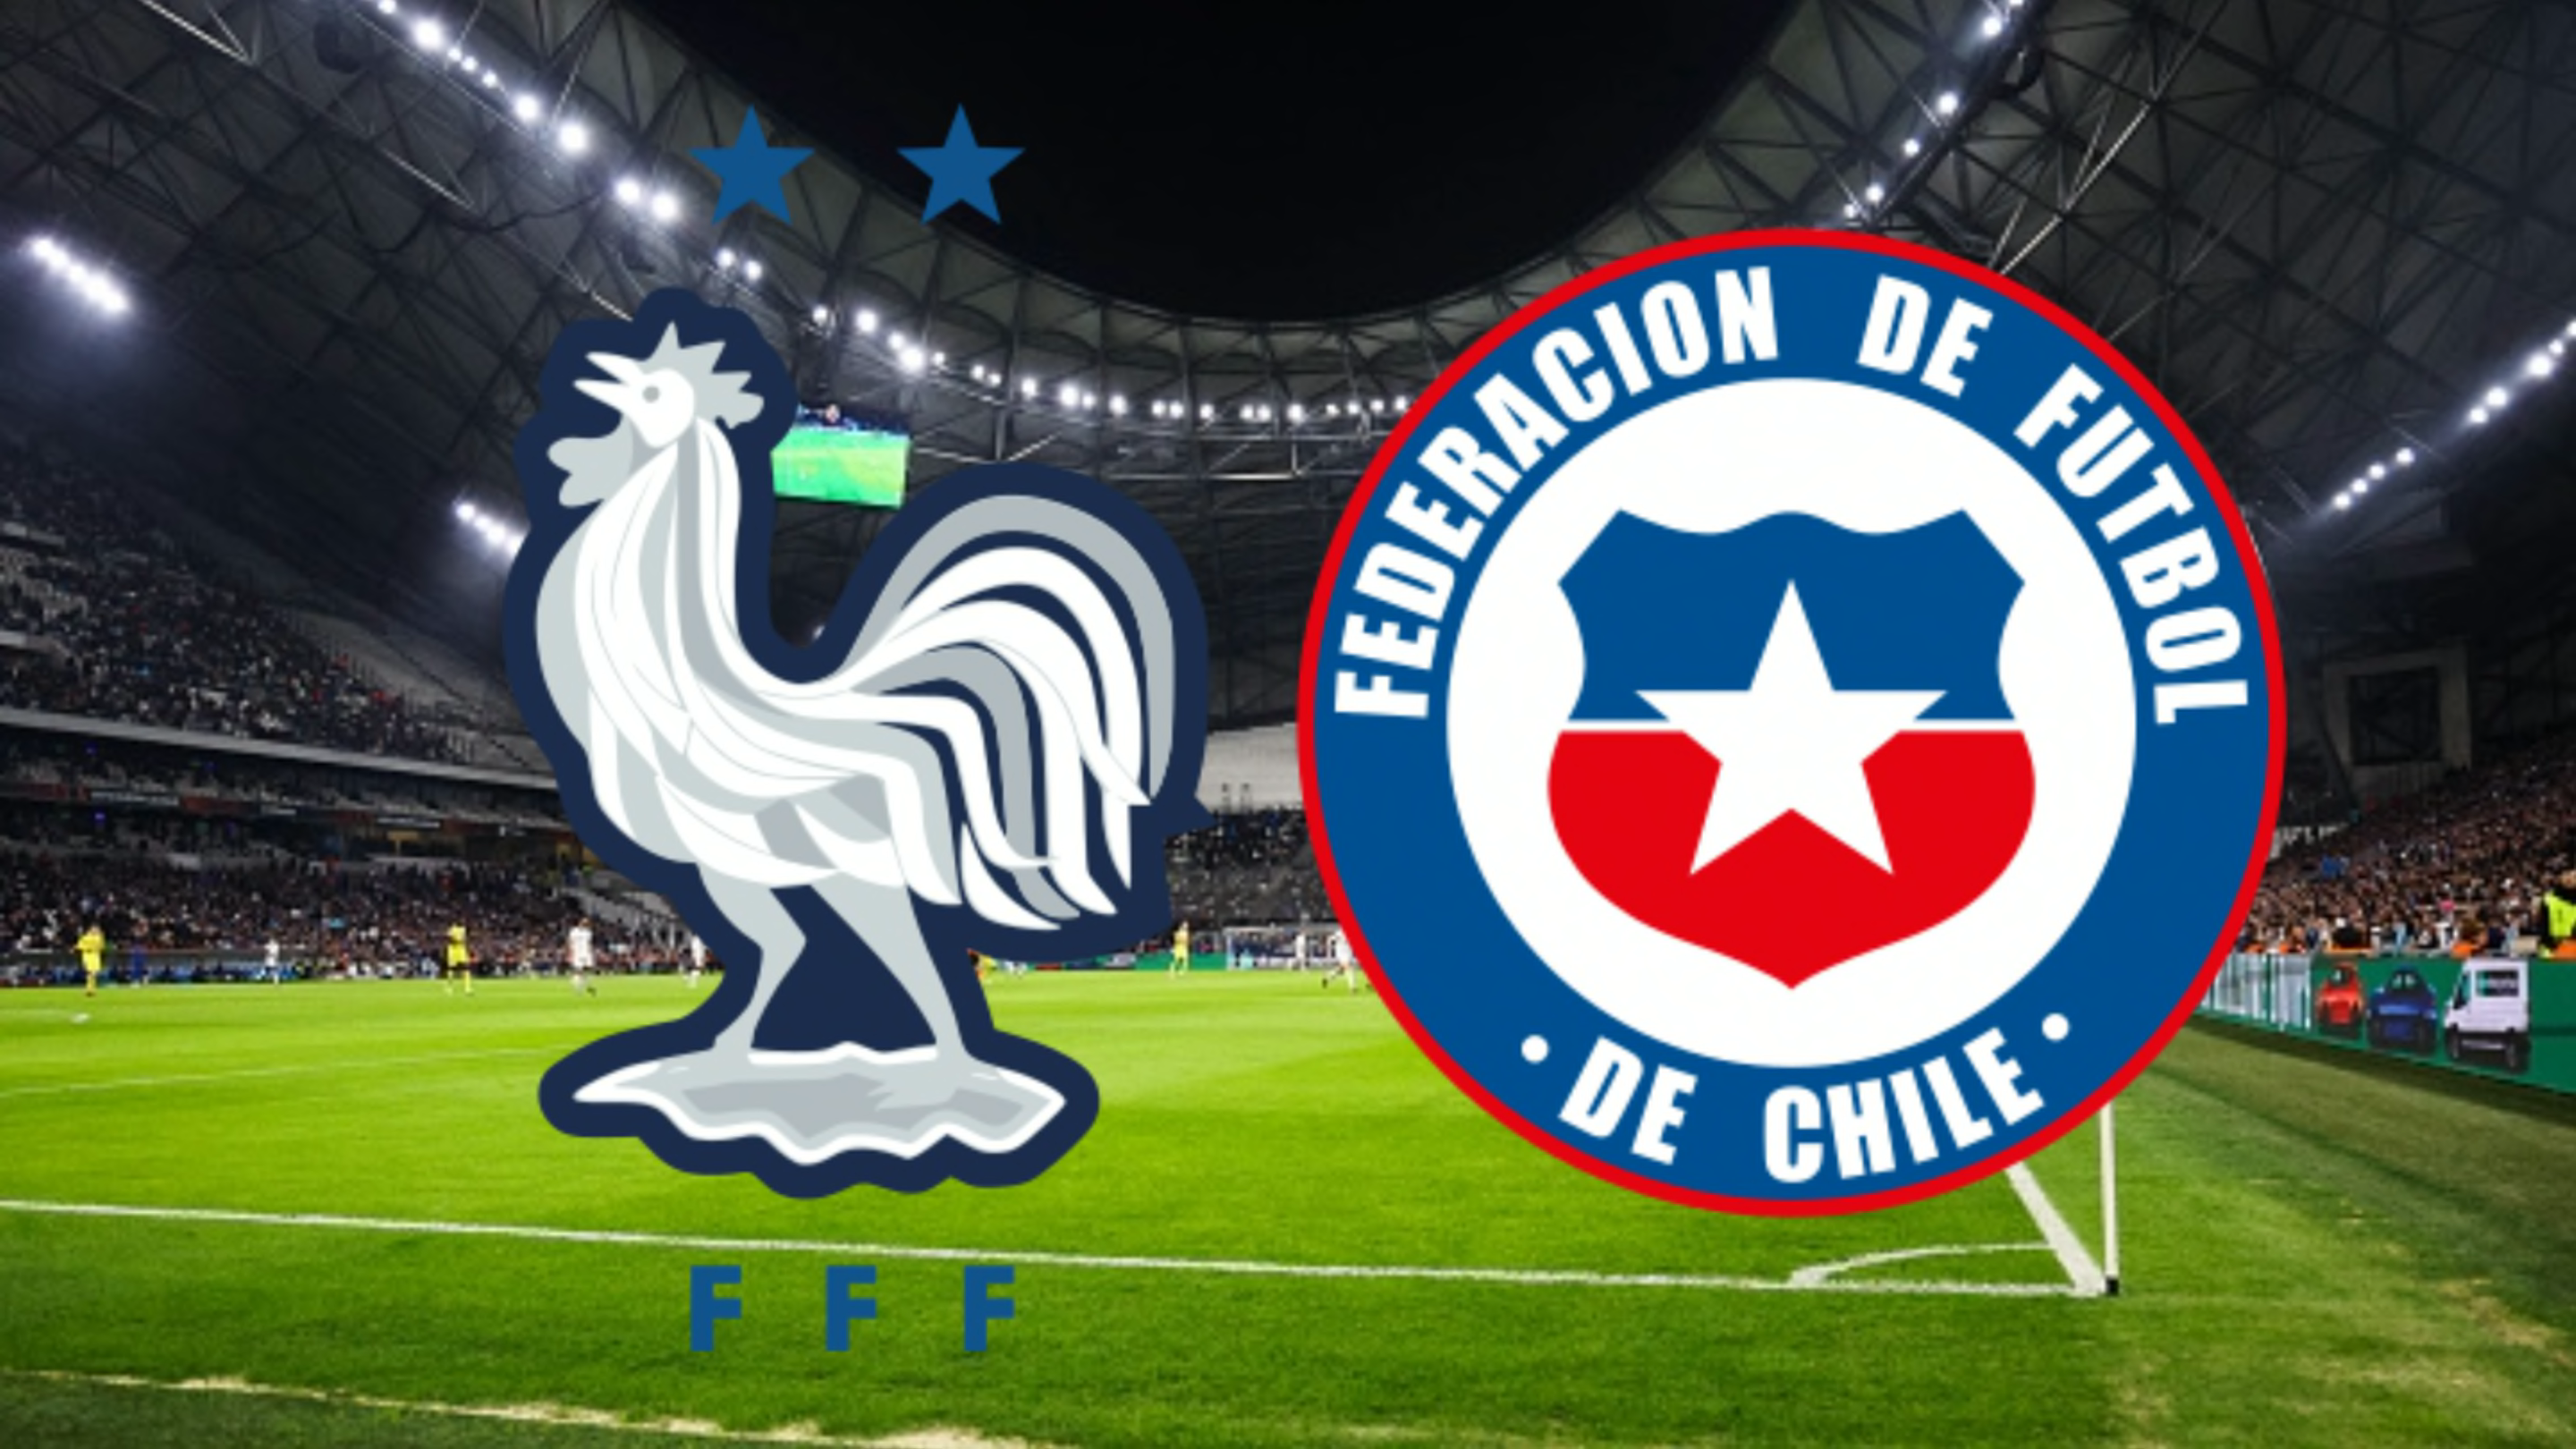 France vs Chile: Preview, predictions and lineups